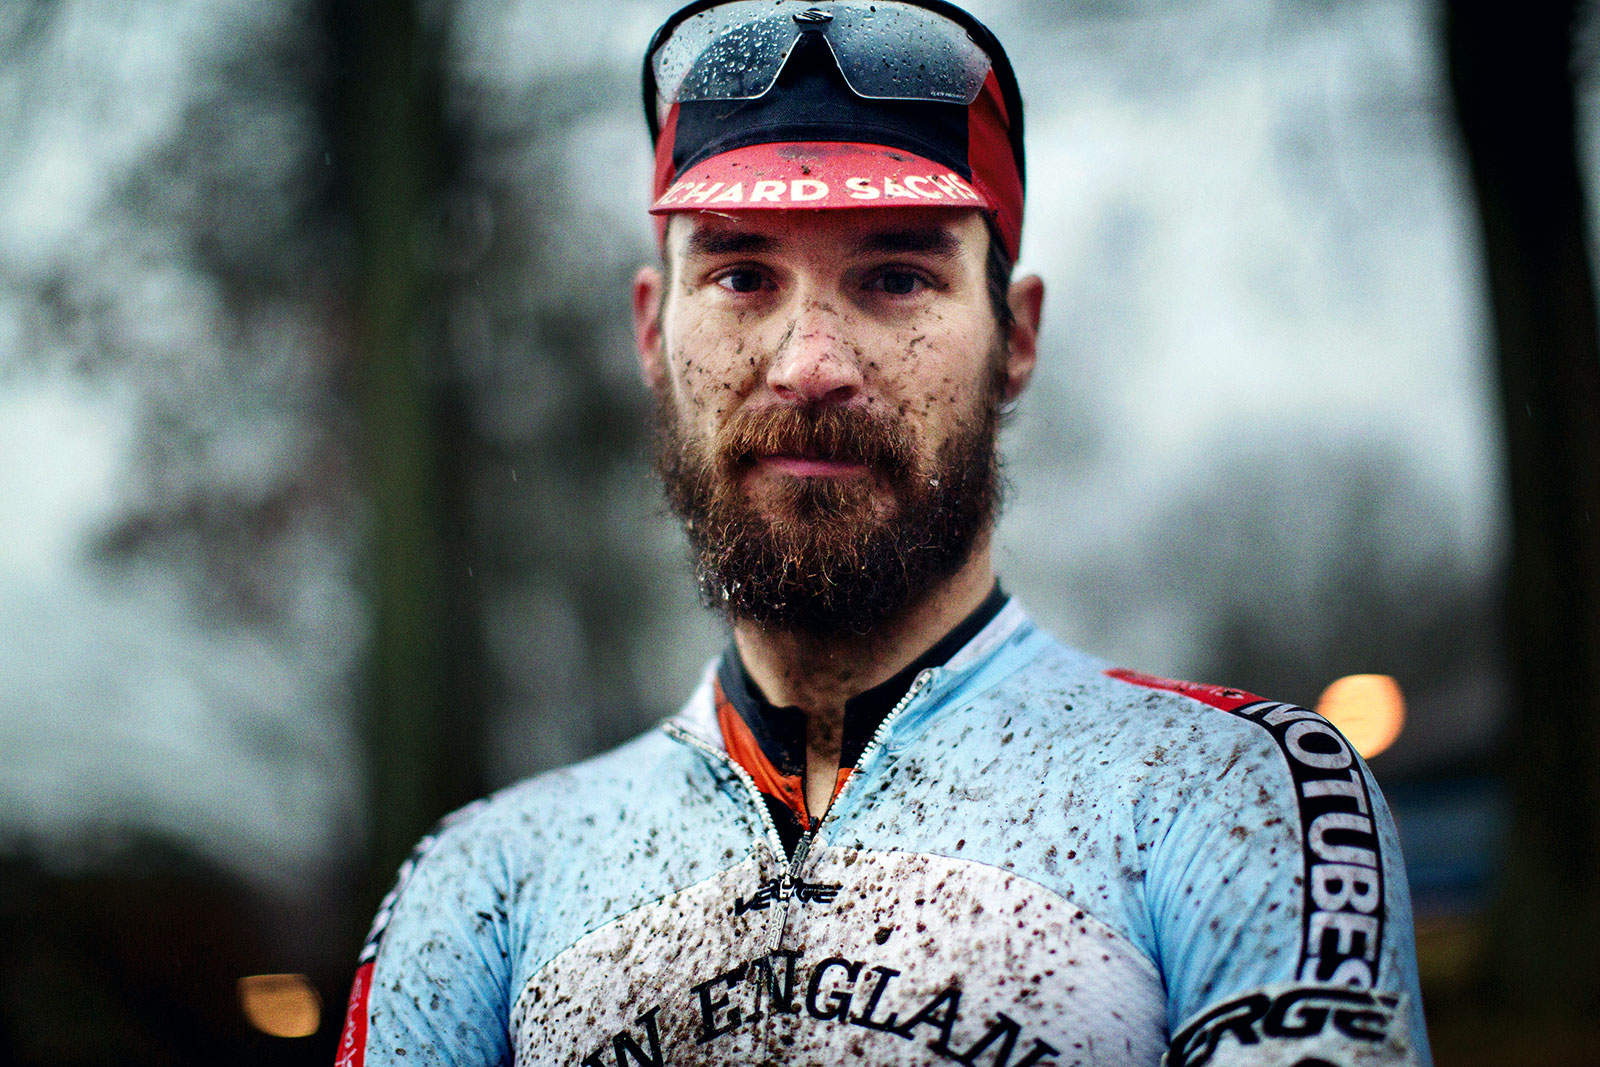 Cyclocross for The Red Bulletin